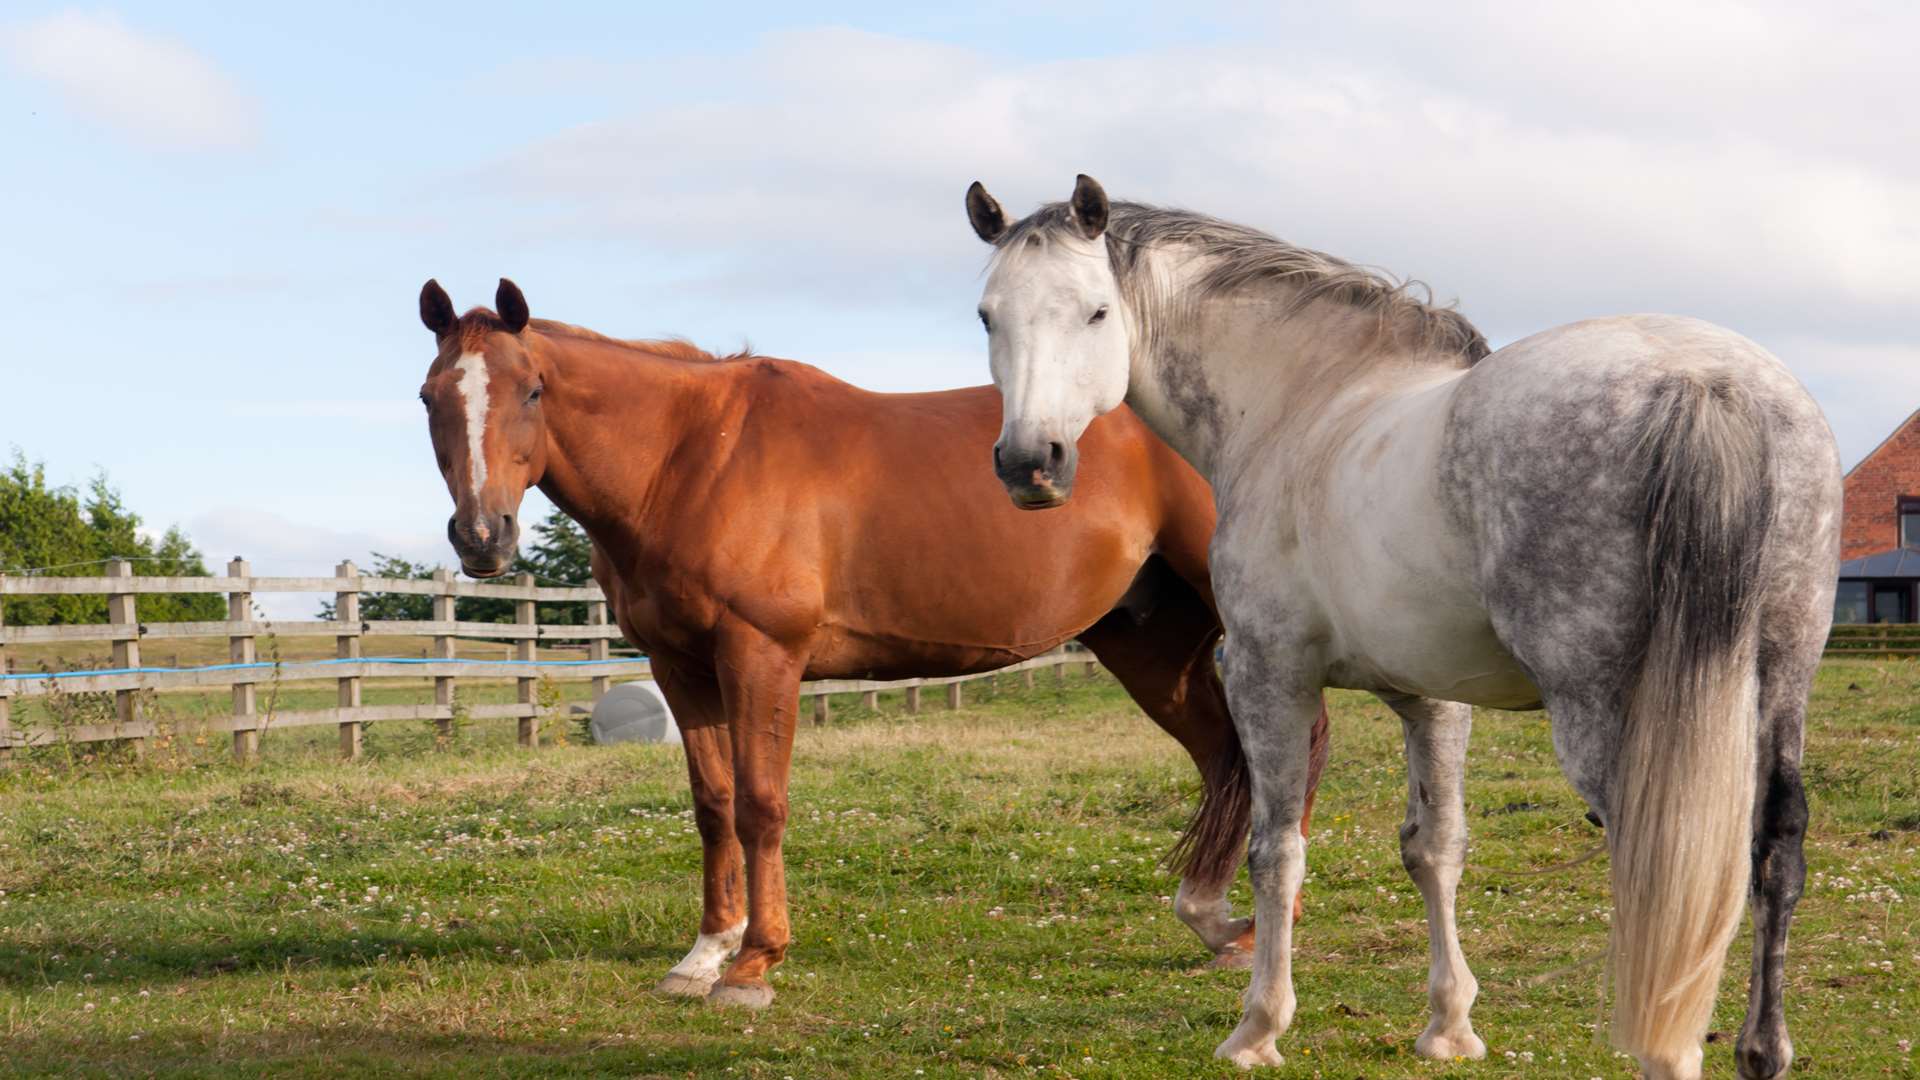 Horses in a paddock. Eileen Groome/Getty Images/iStockphoto